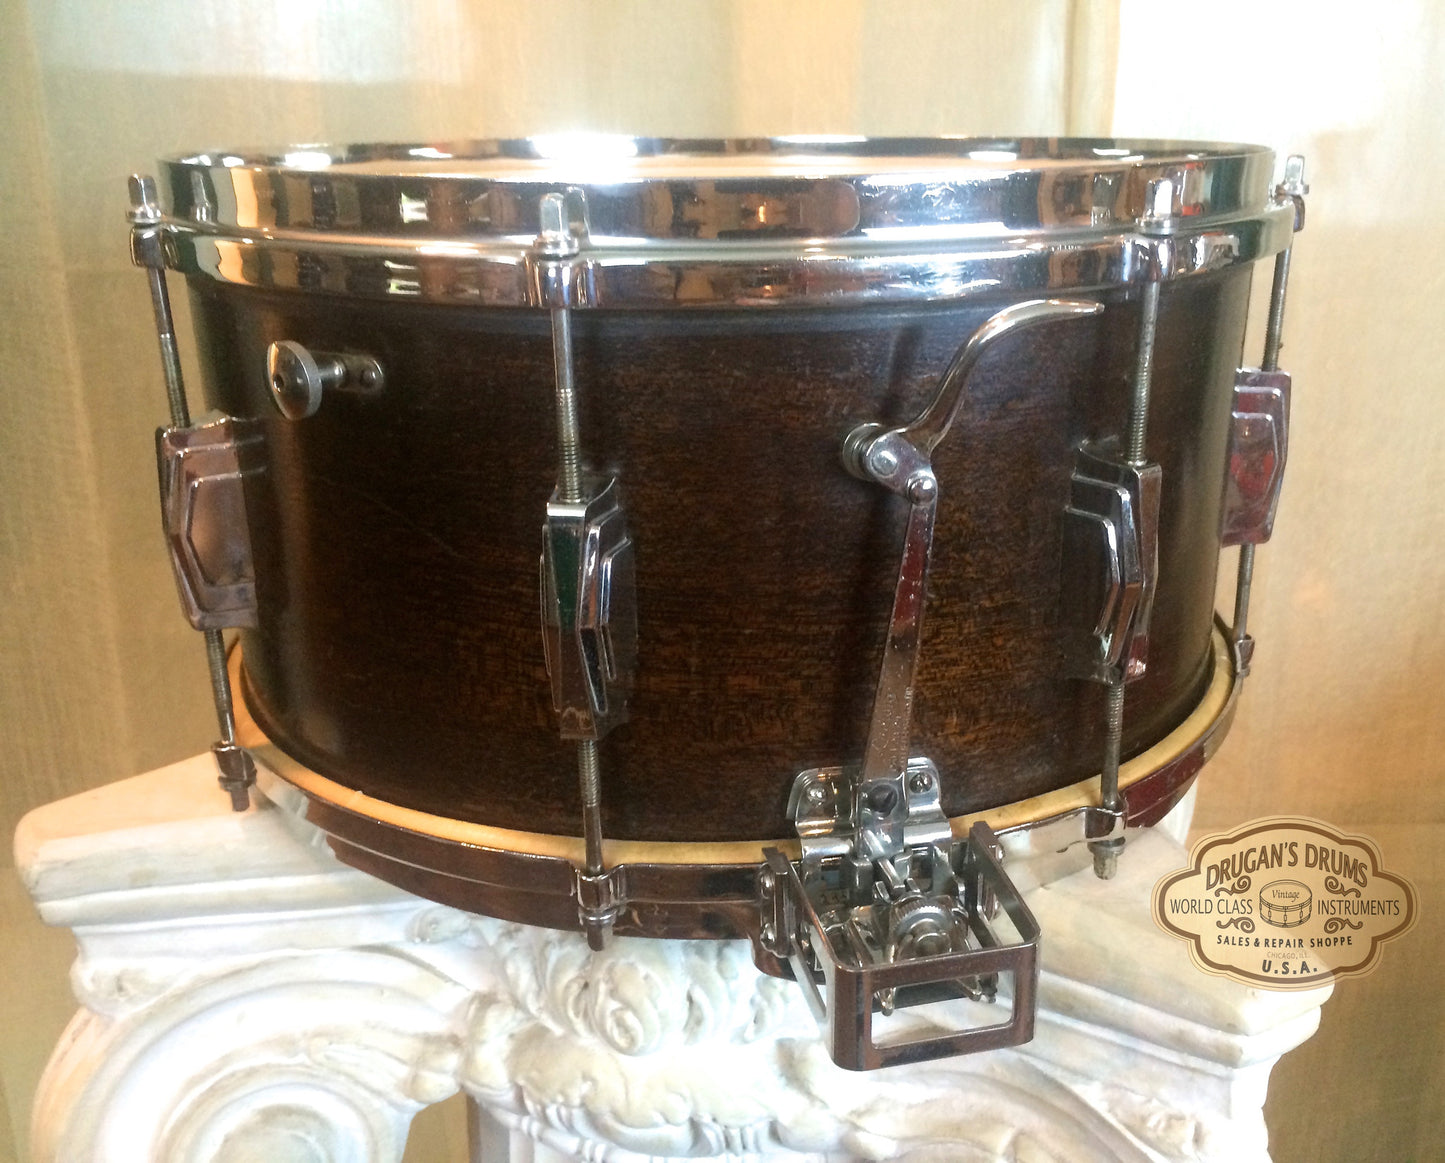 Stunning 1939 Super Ludwig & Ludwig 6.5x14 Snare Drum